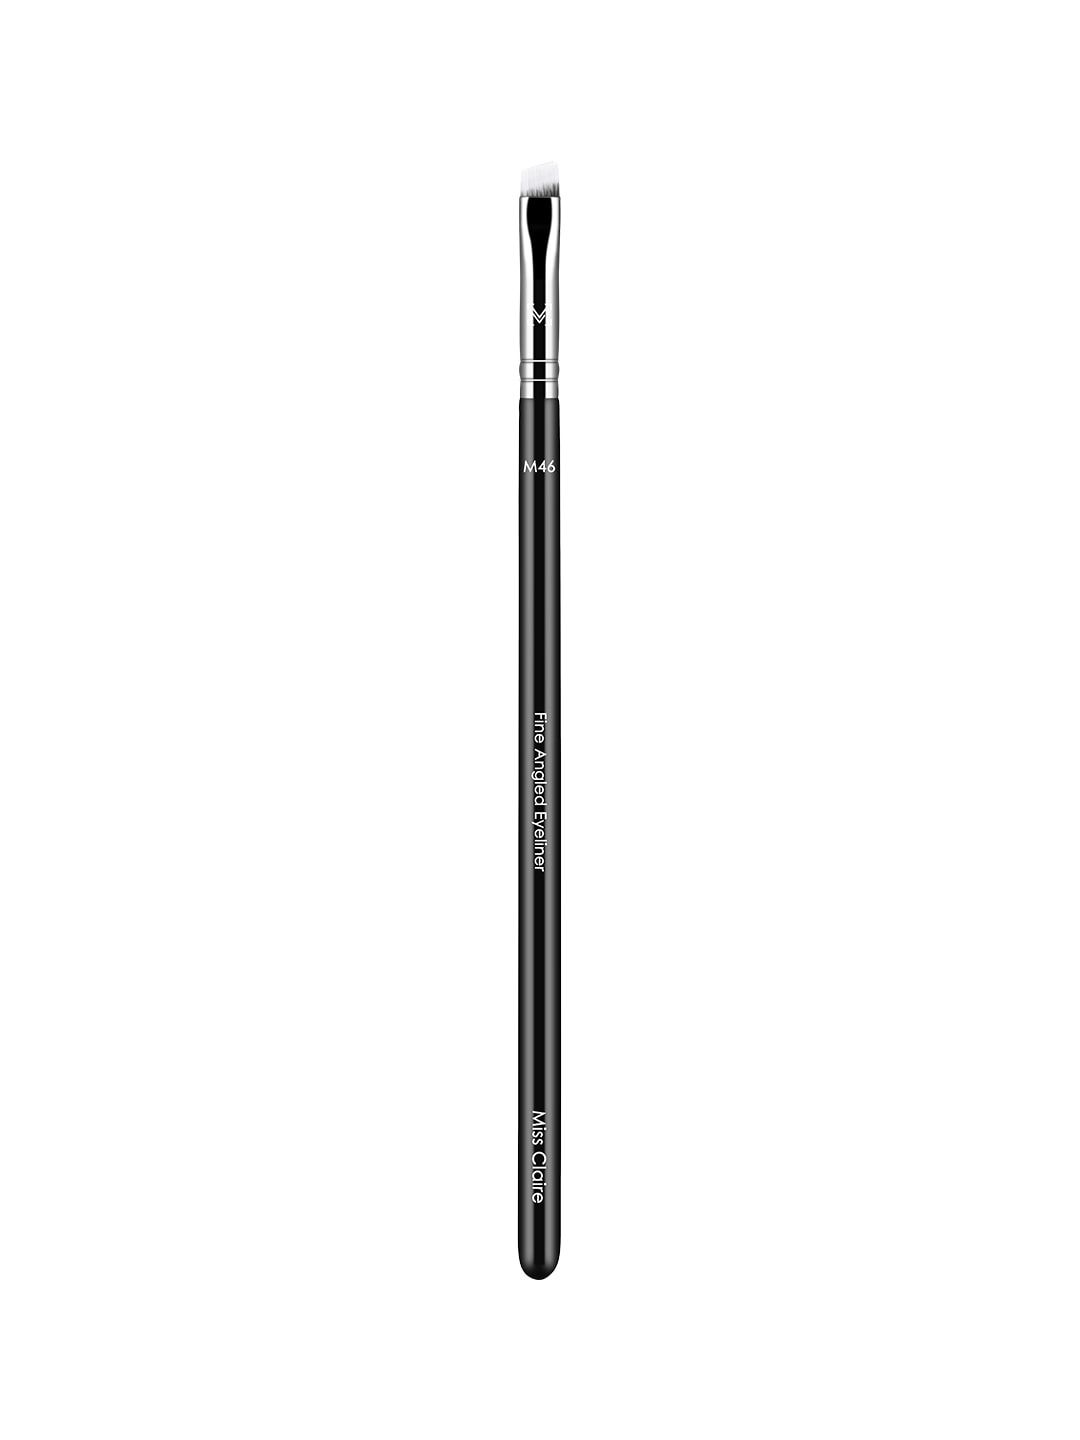 Miss Claire M46 - Fine Angled Eyeliner Brush - Silver-Toned & Black Price in India